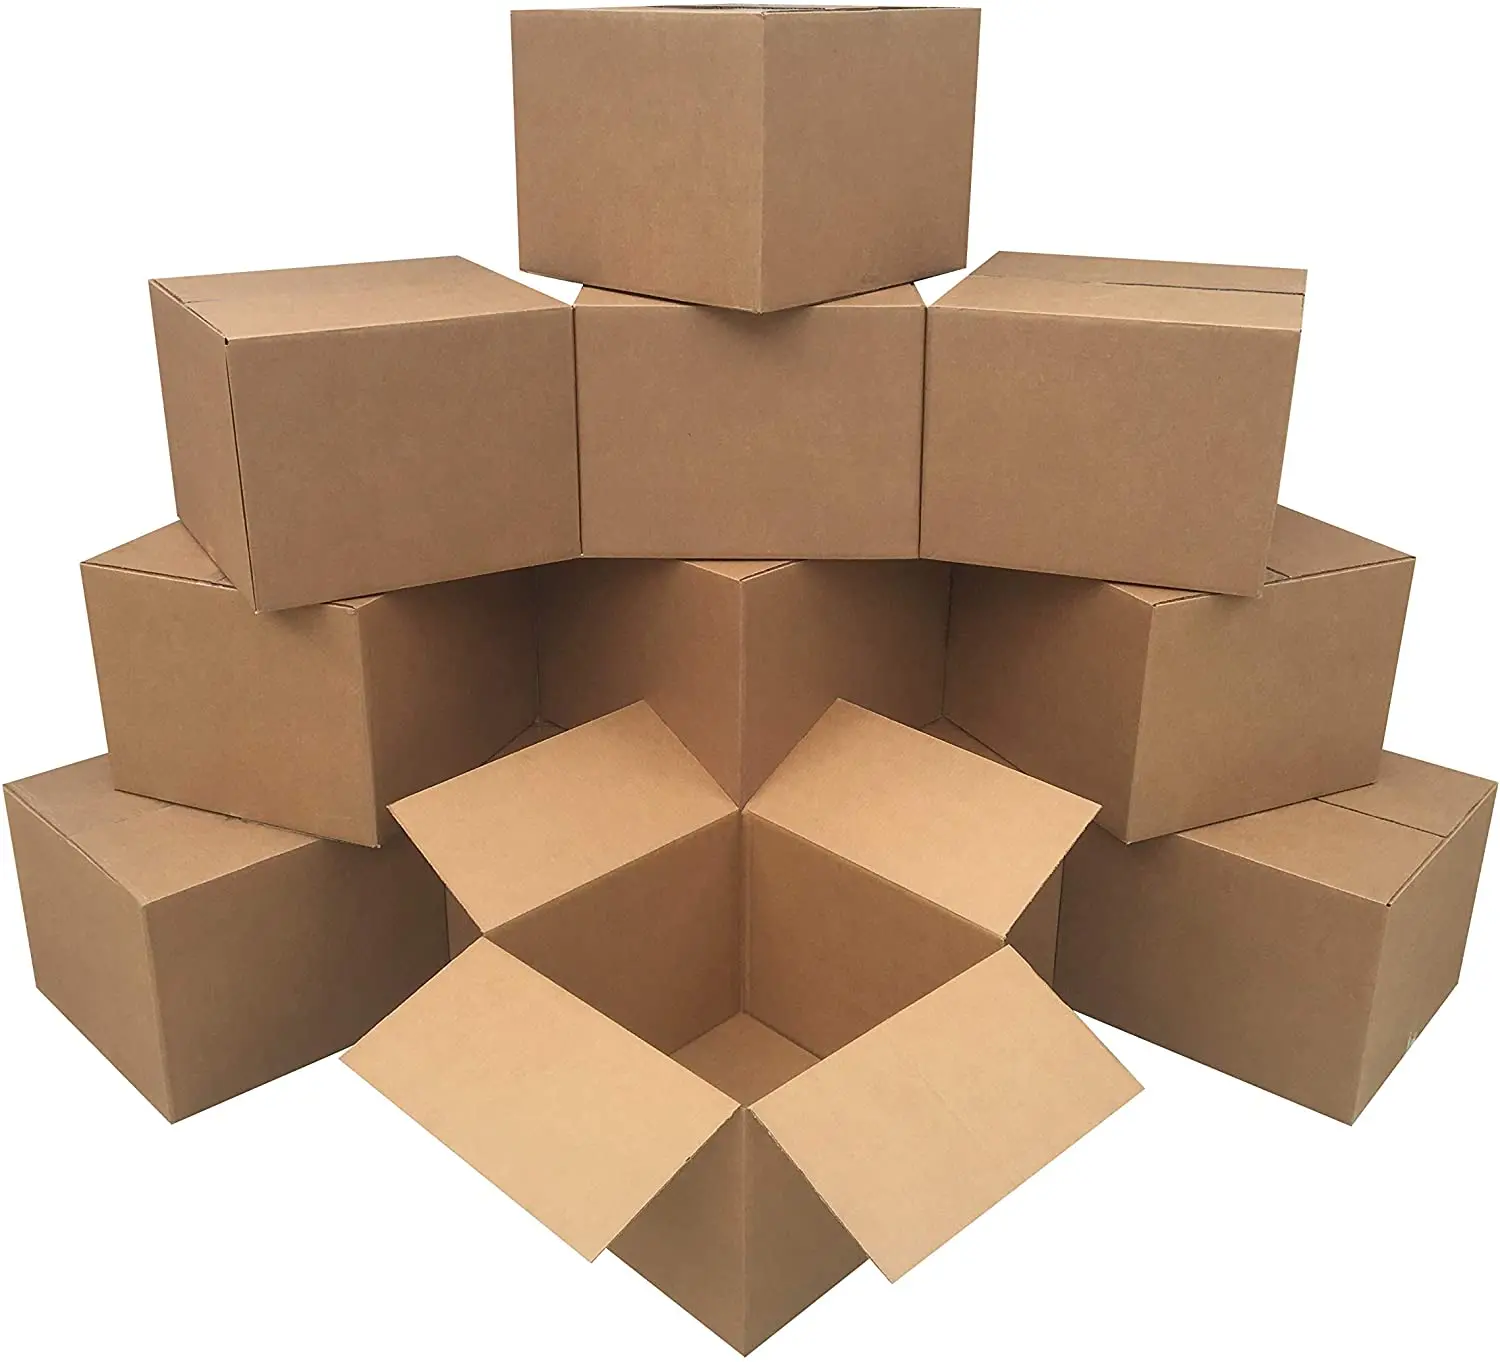 Large Medium Moving Box,Moving Made Simple With Our Boxes. Fast And Quick.  Mailing,Shipping,Transporting - Buy Moving Box,Mailing Shipping Box,Moving  Made Simple With Our Box Product on Alibaba.com